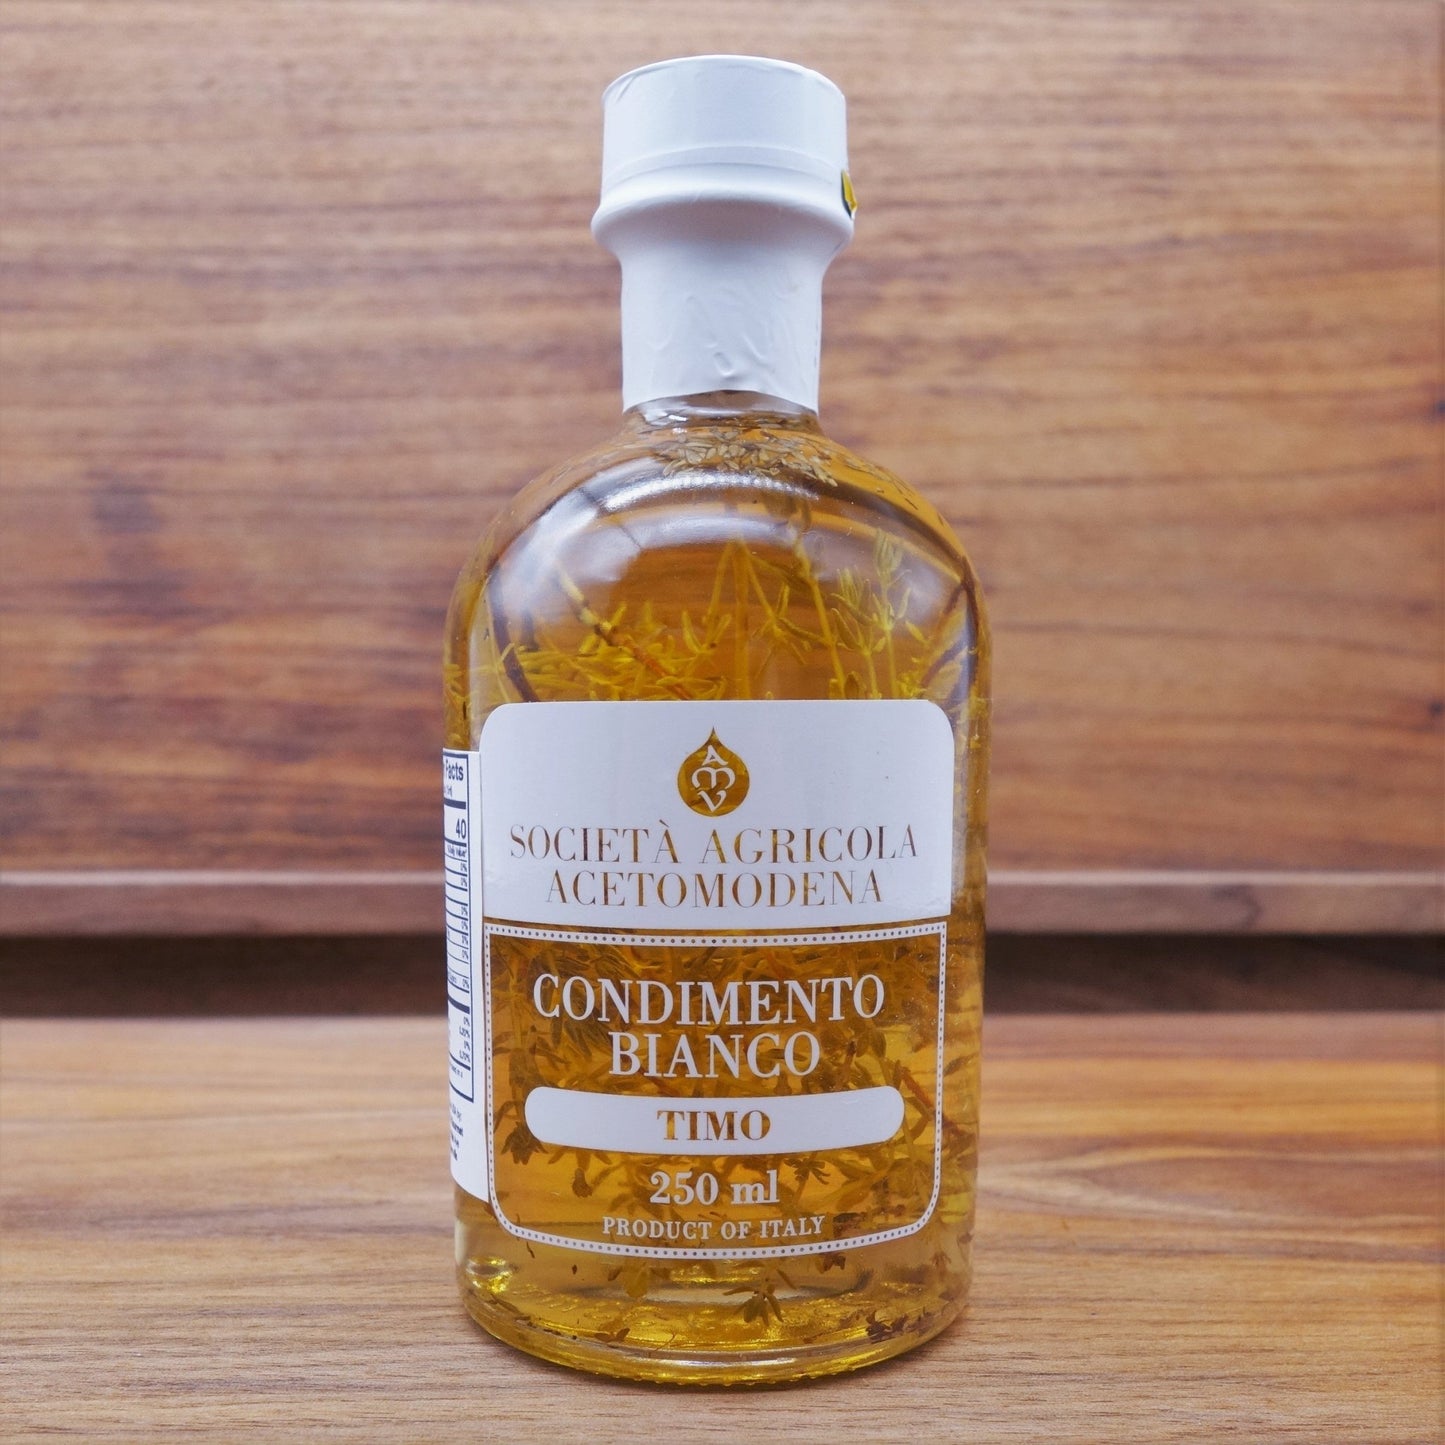 Acetomodena Condimento Bianco Timo - White Balsamic with Thyme - Mongers' Provisions